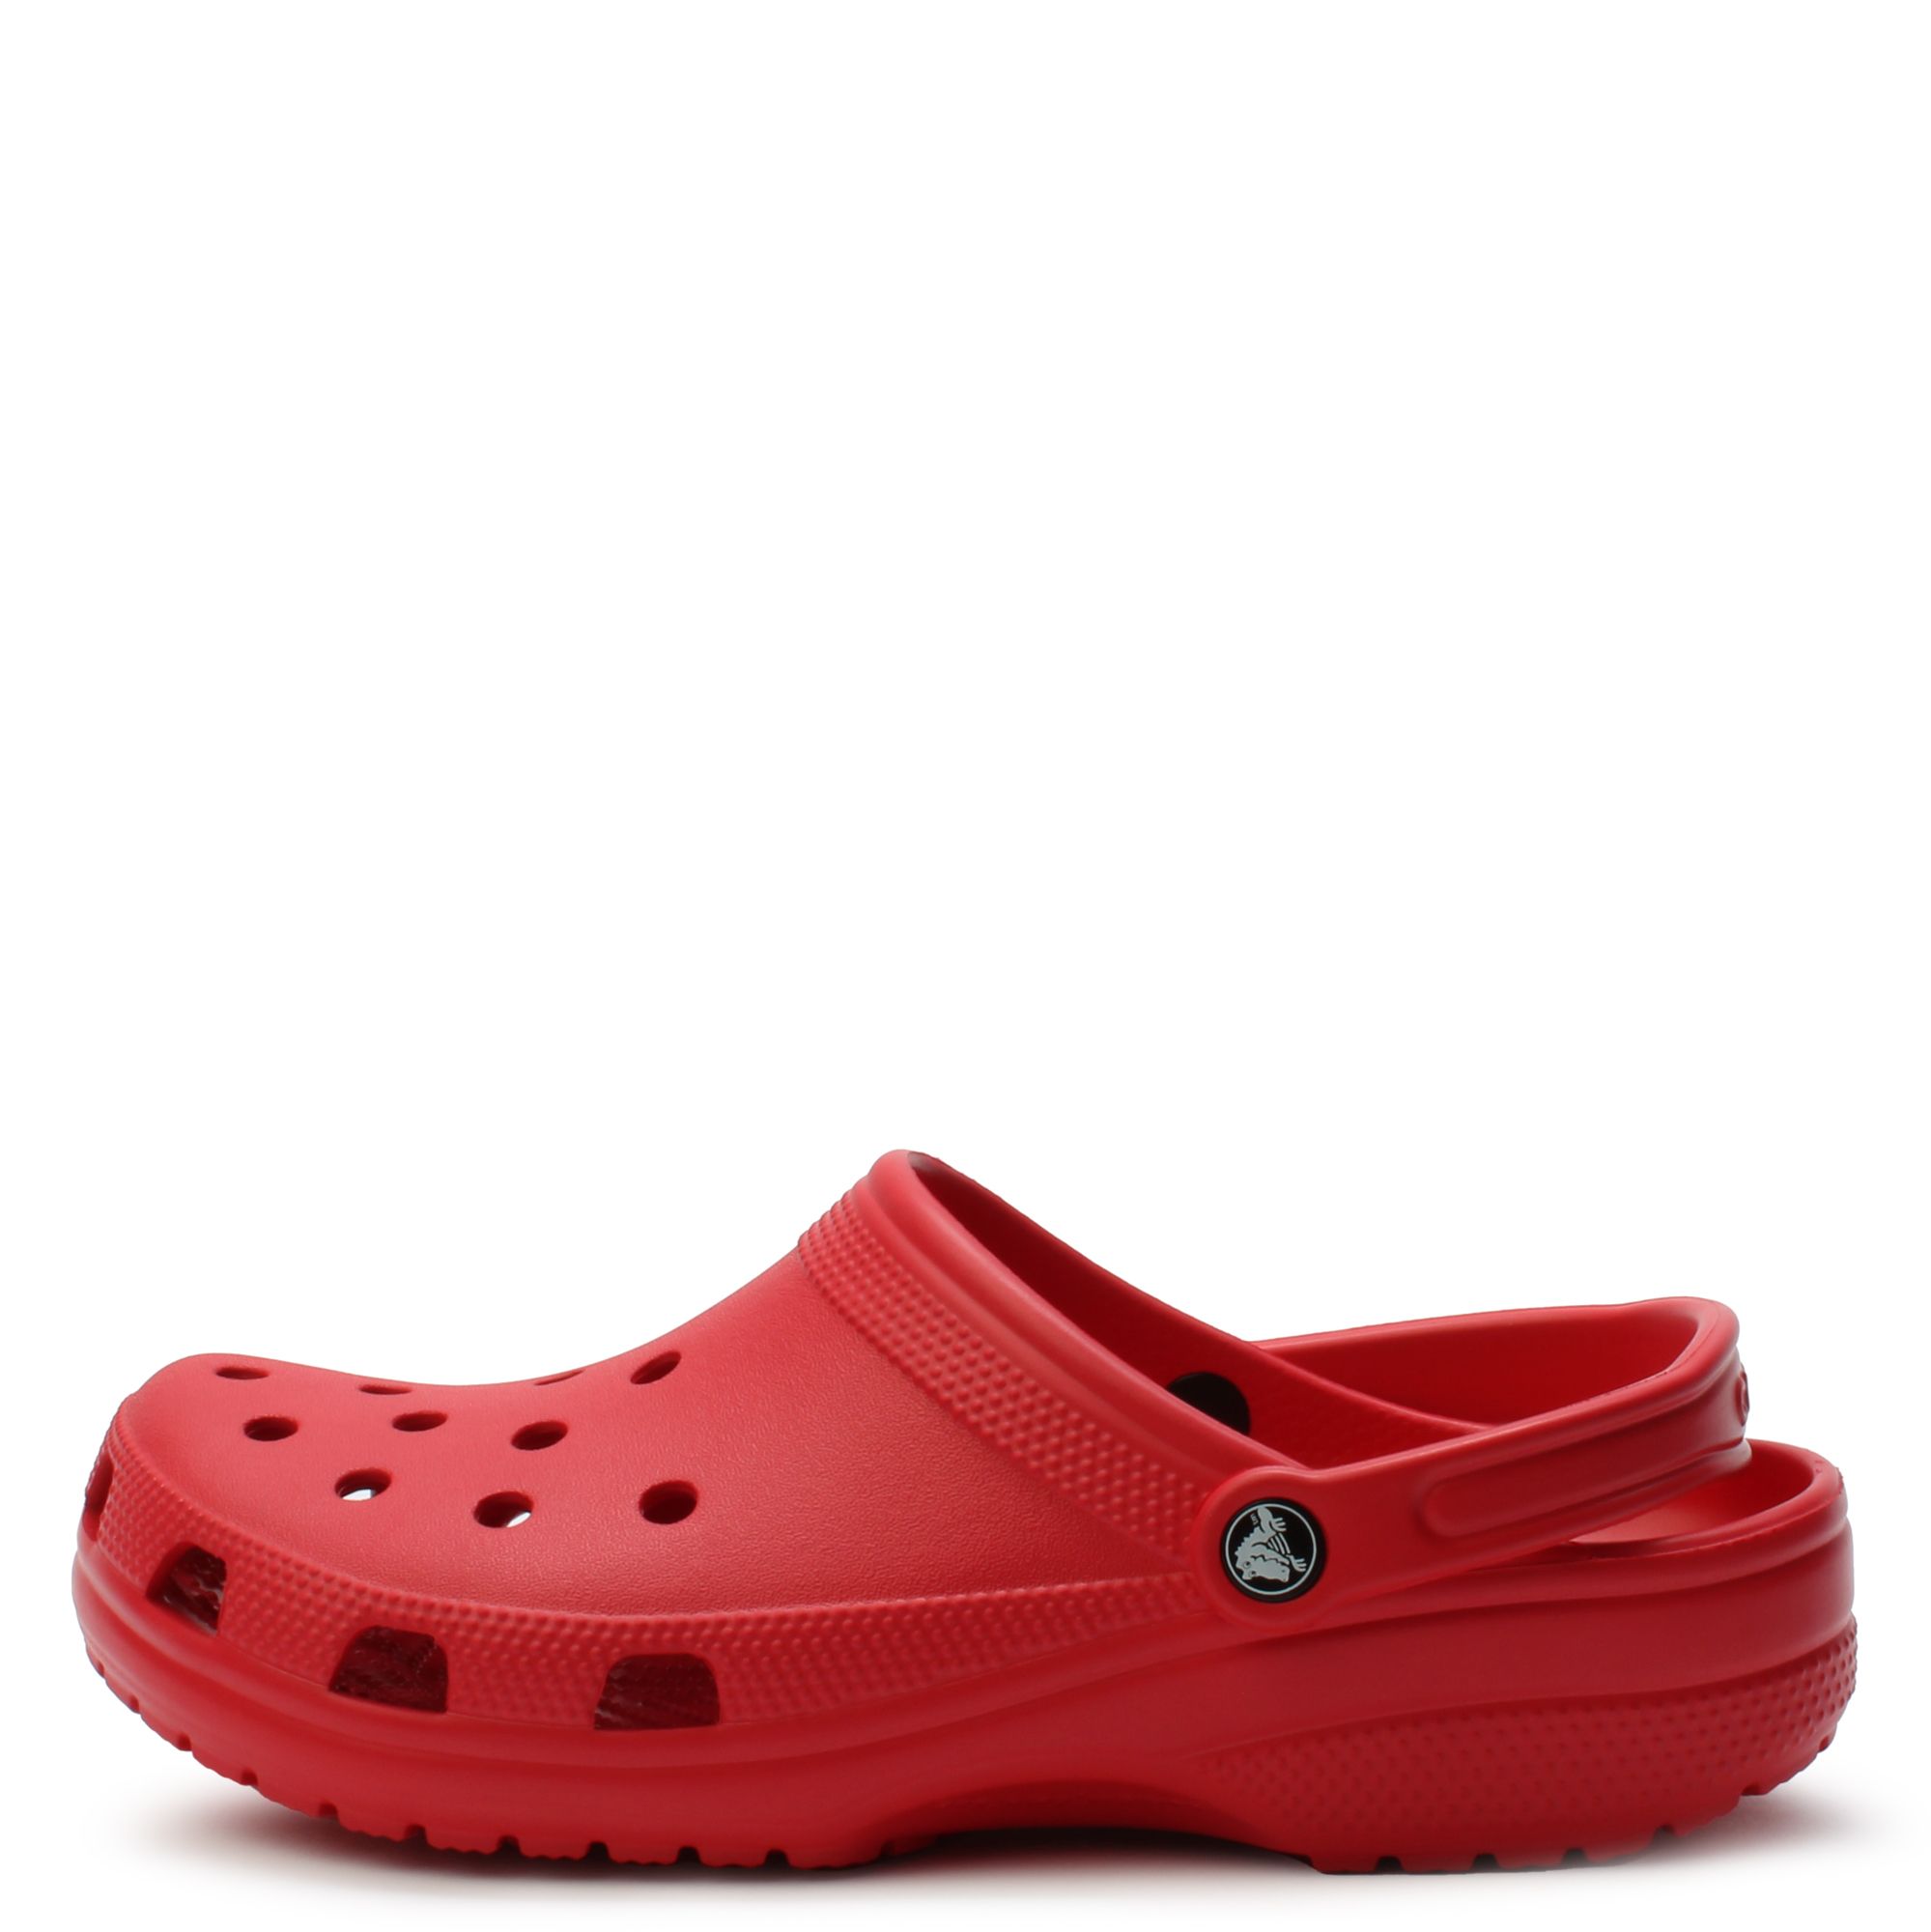 Put the crocs in 4-lo for this ice storm : r/crocs